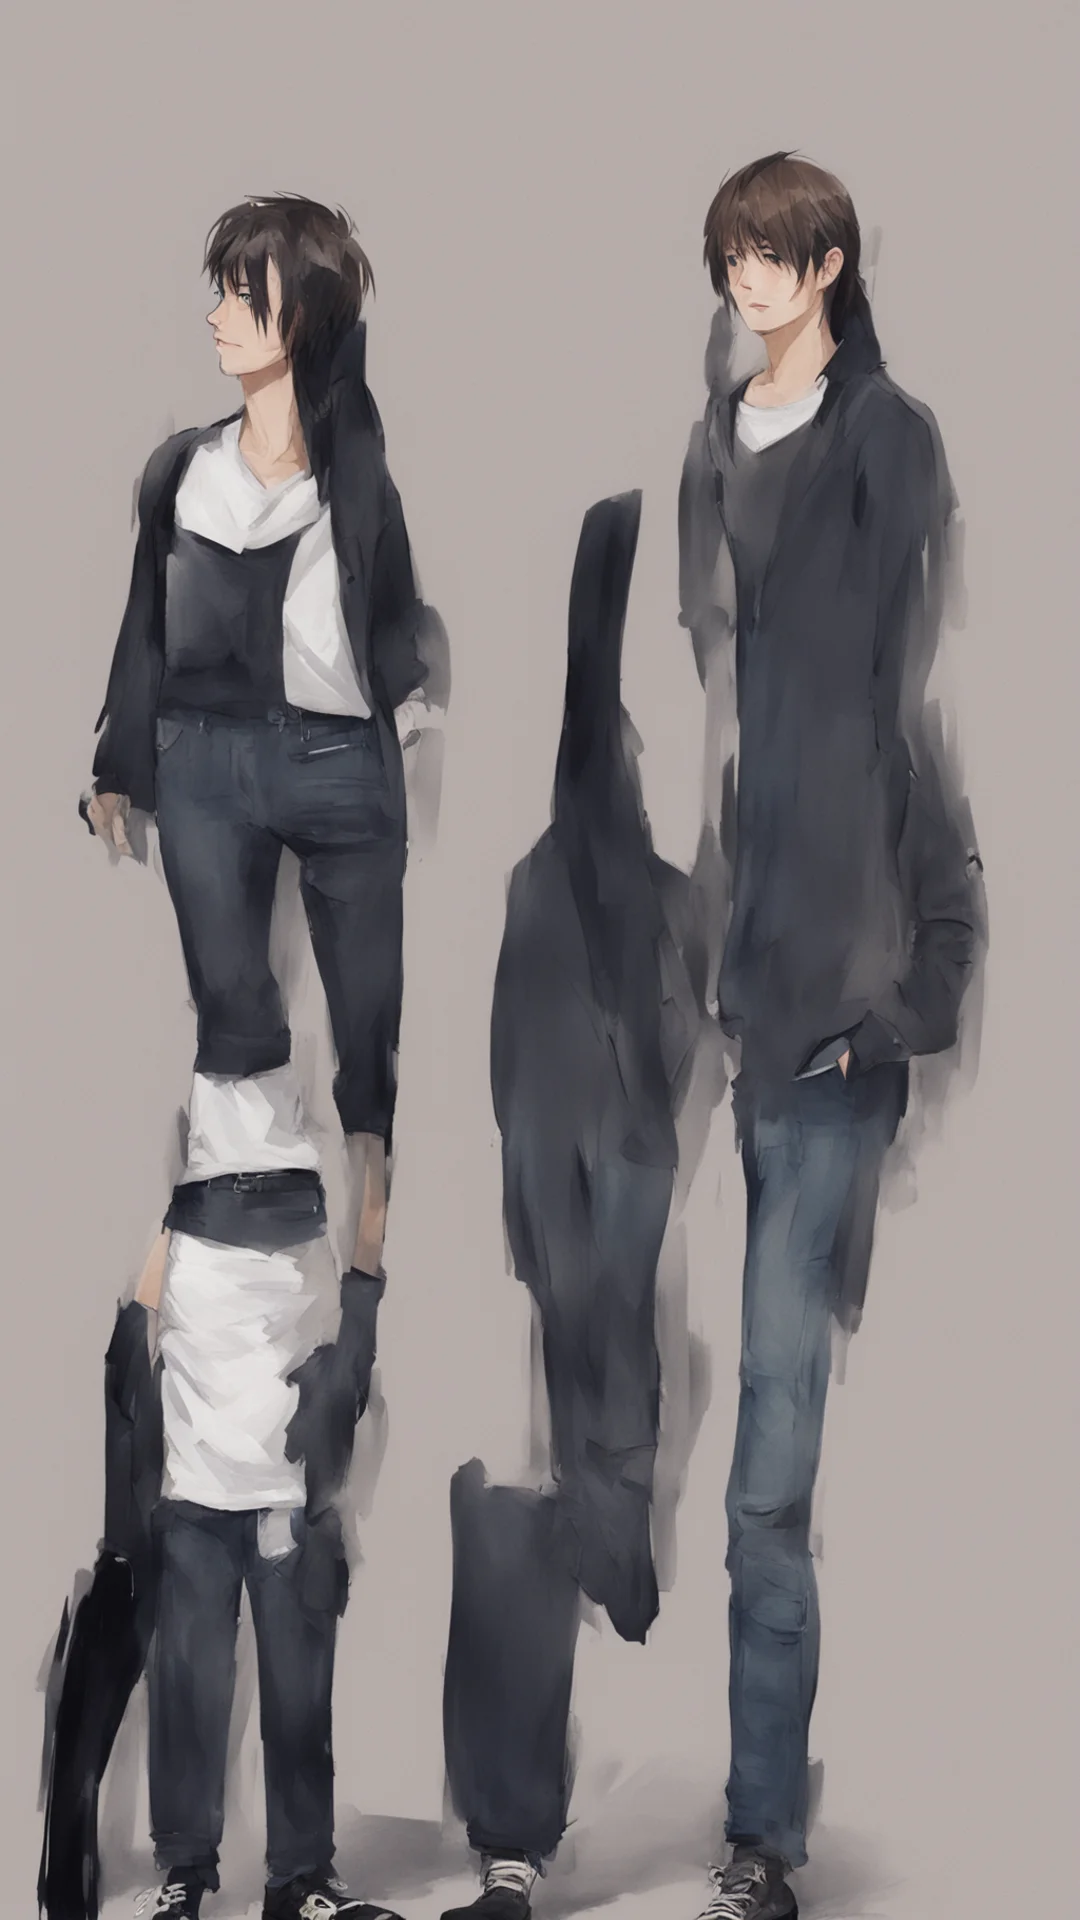 aiheight difference confident engaging wow artstation art 3 tall